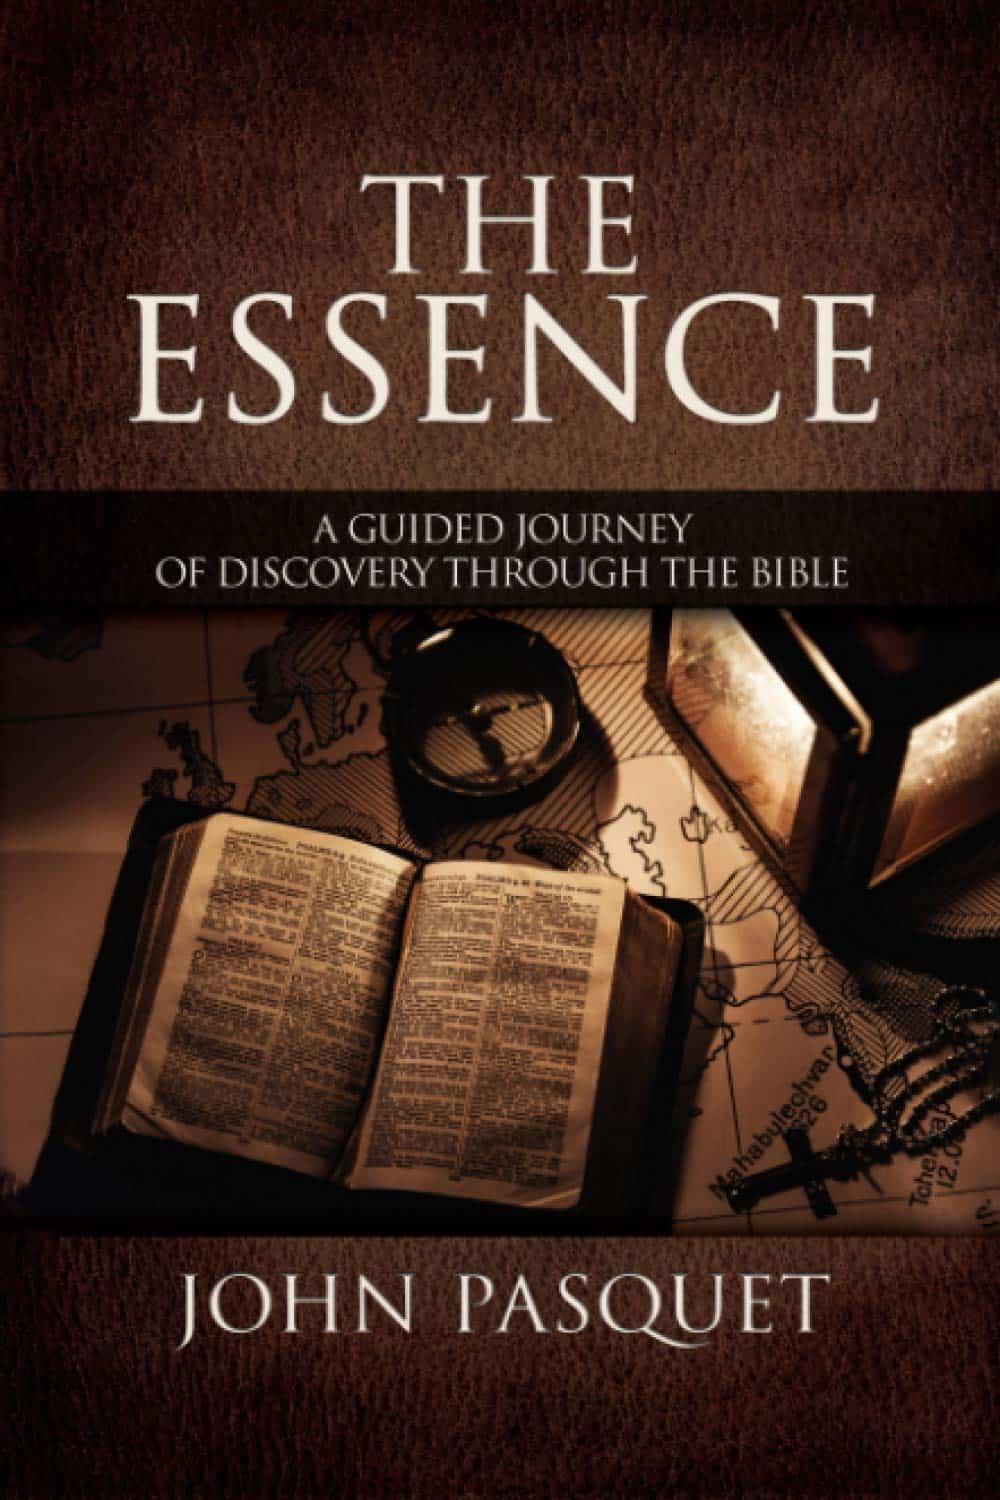 The Essence: A Guided Journey of Discovery Through the Bible by John Pasquet